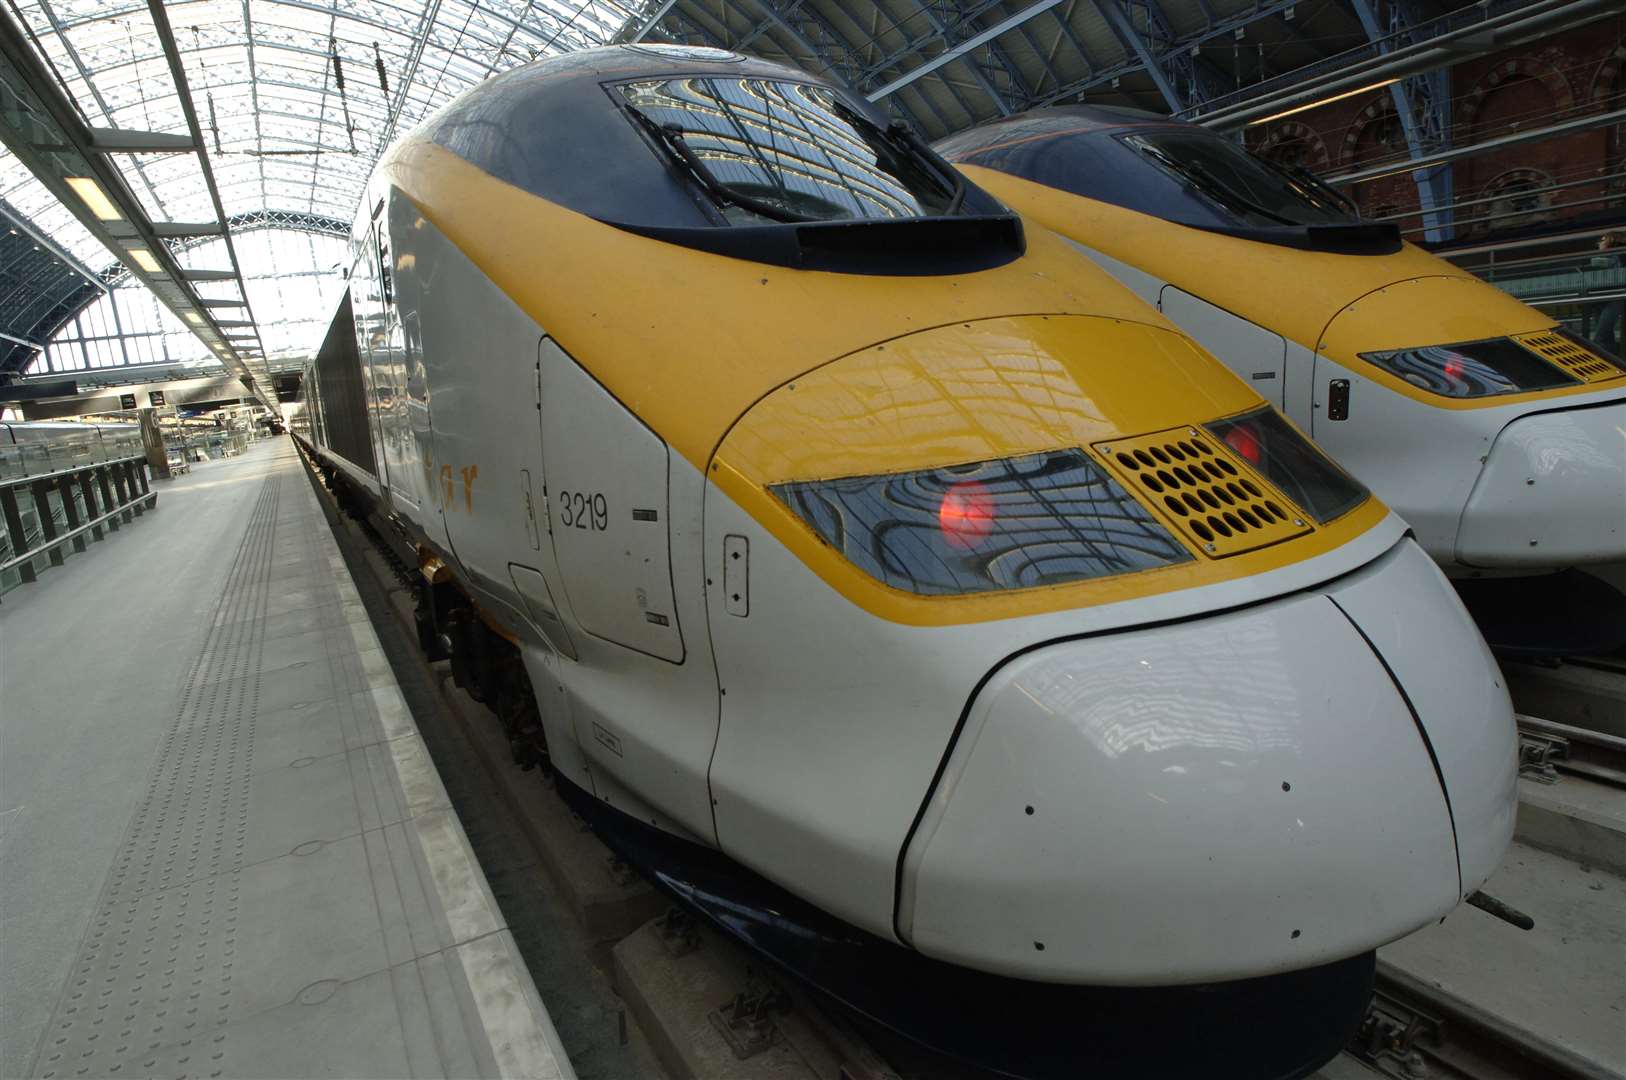 Some Eurostar services have been cancelled